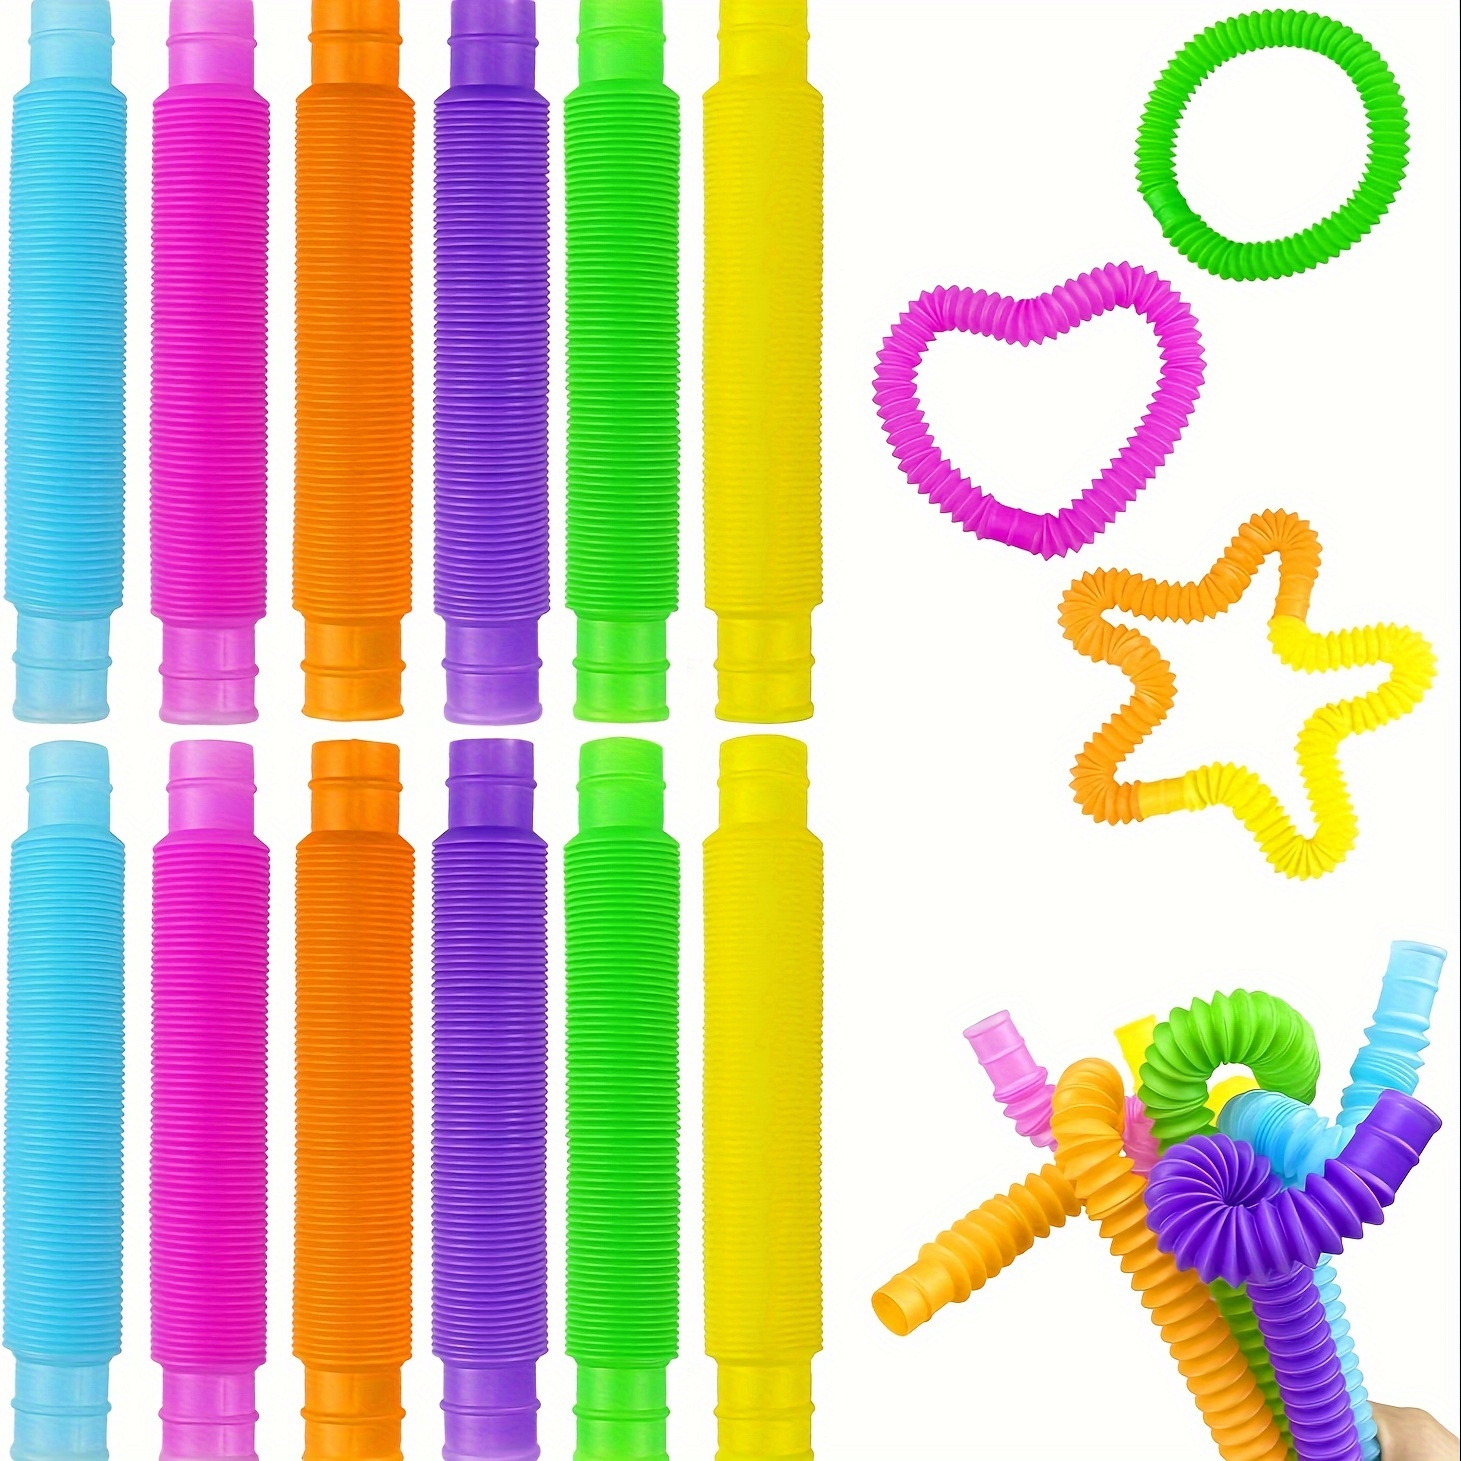 

12pcs Pop Tube Telescopic Tube Diy Sensory Colorful Elastic Tube Decompressing \toy, Funny Creative Gift, For Outdoor Games, Office, Party Gathering (random Color)